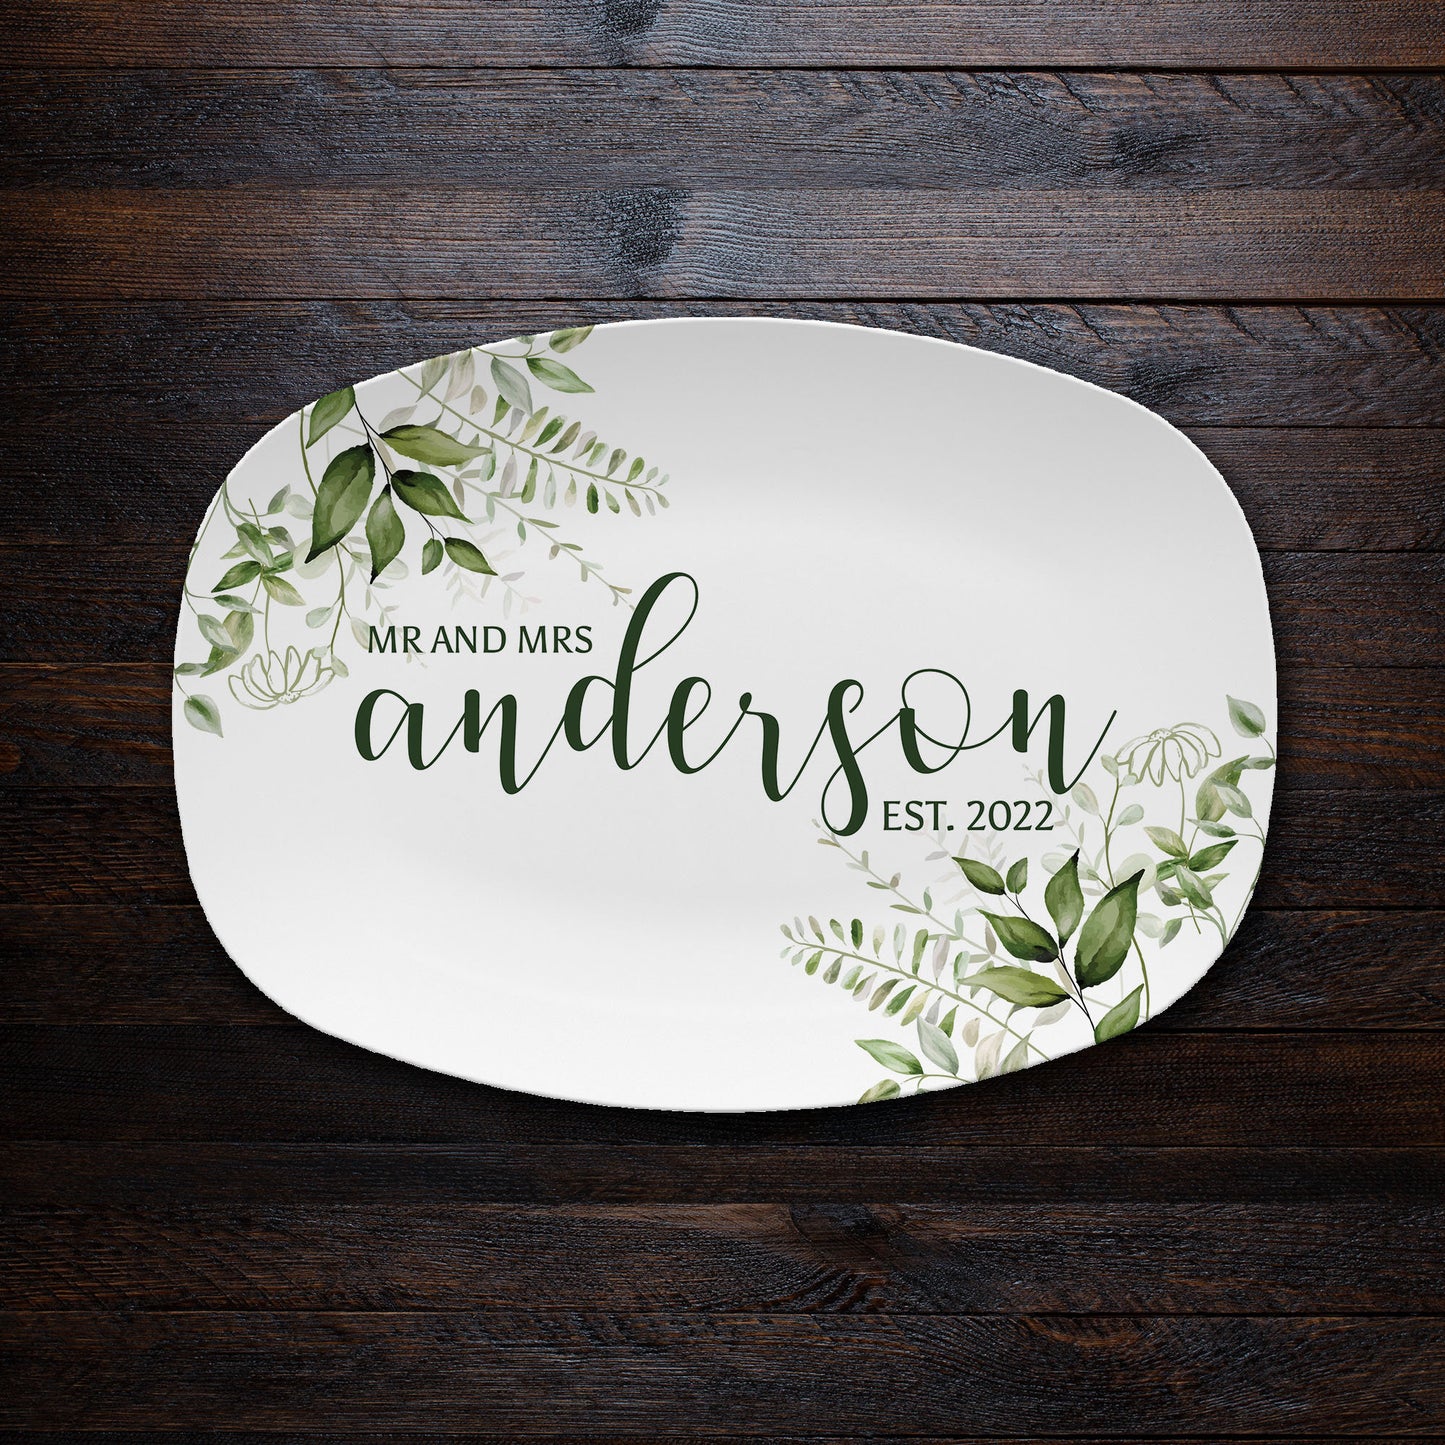 Personalized Mother's Day Handprint Plate-P5